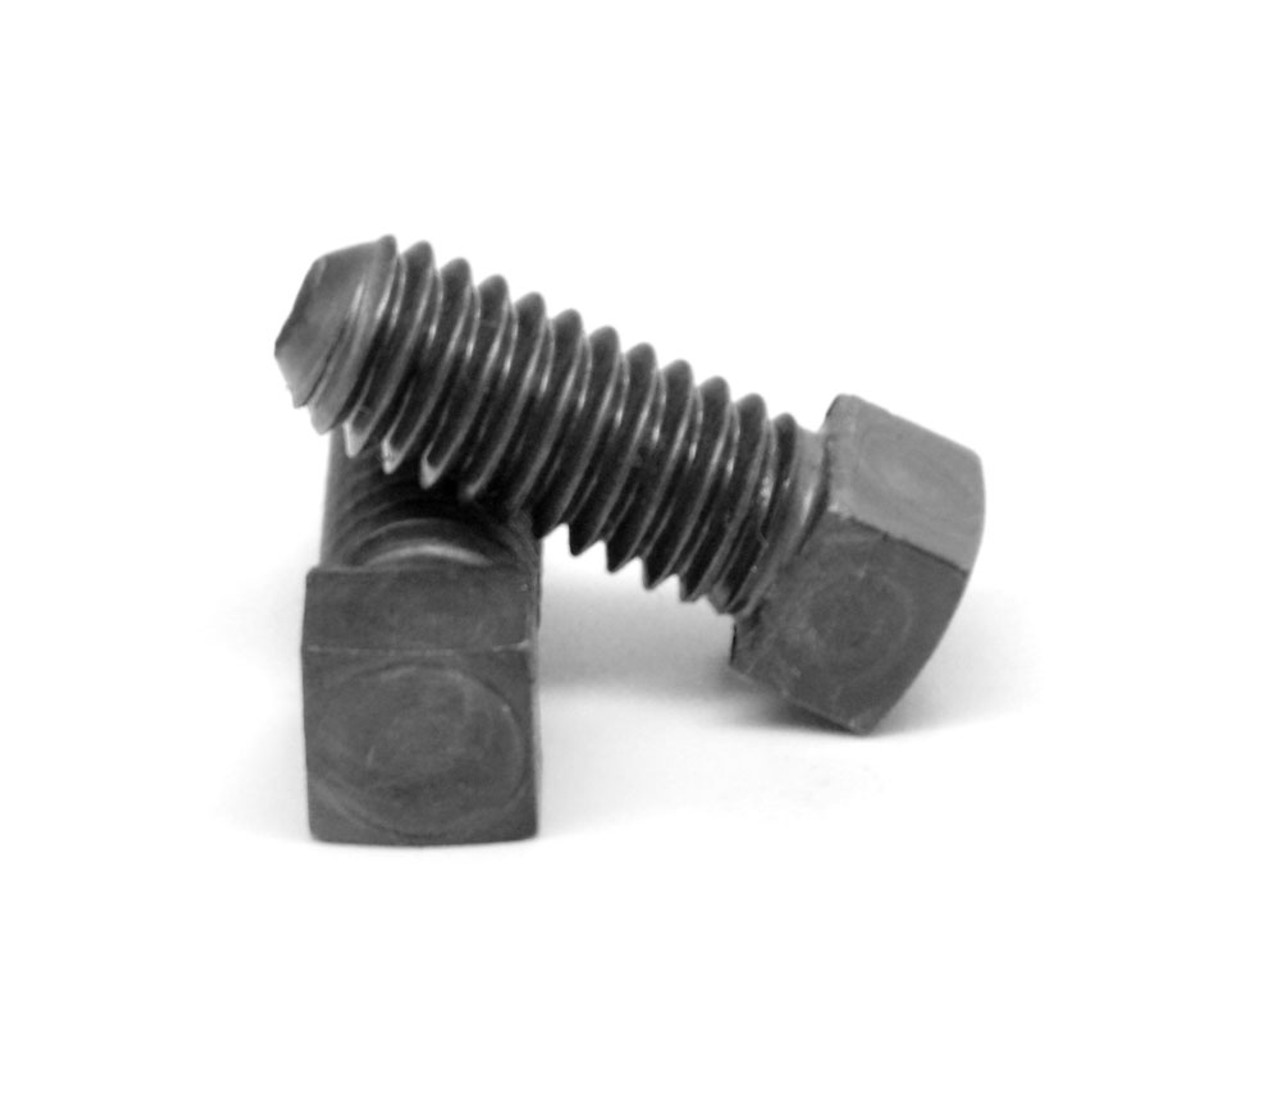 1/4"-20 x 4 1/2" (FT) Coarse Thread Square Head Set Screw Cup Point Low Carbon Steel Case Hardened Plain Finish